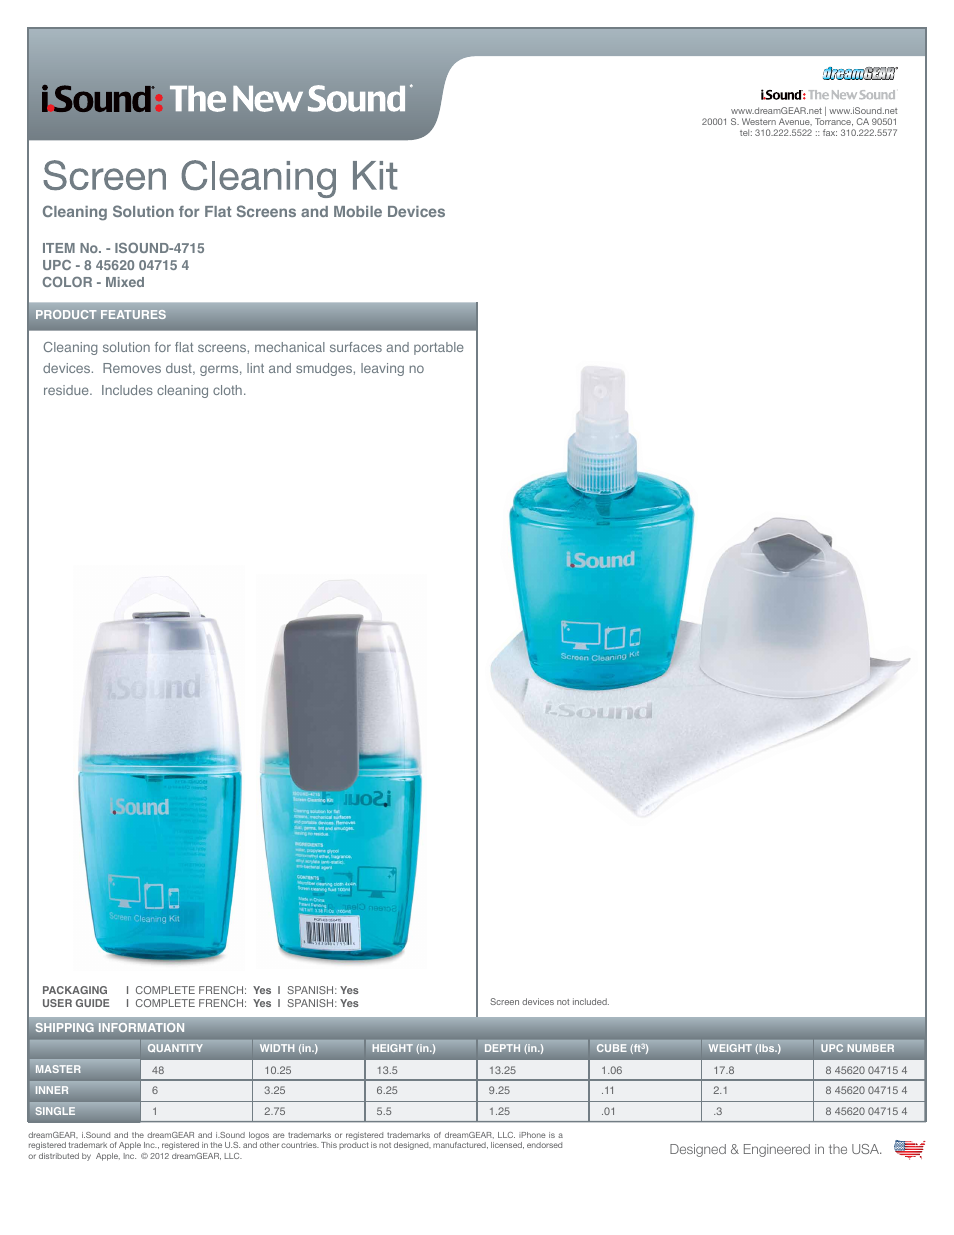 Screen Cleaning Kit - Sell Sheet